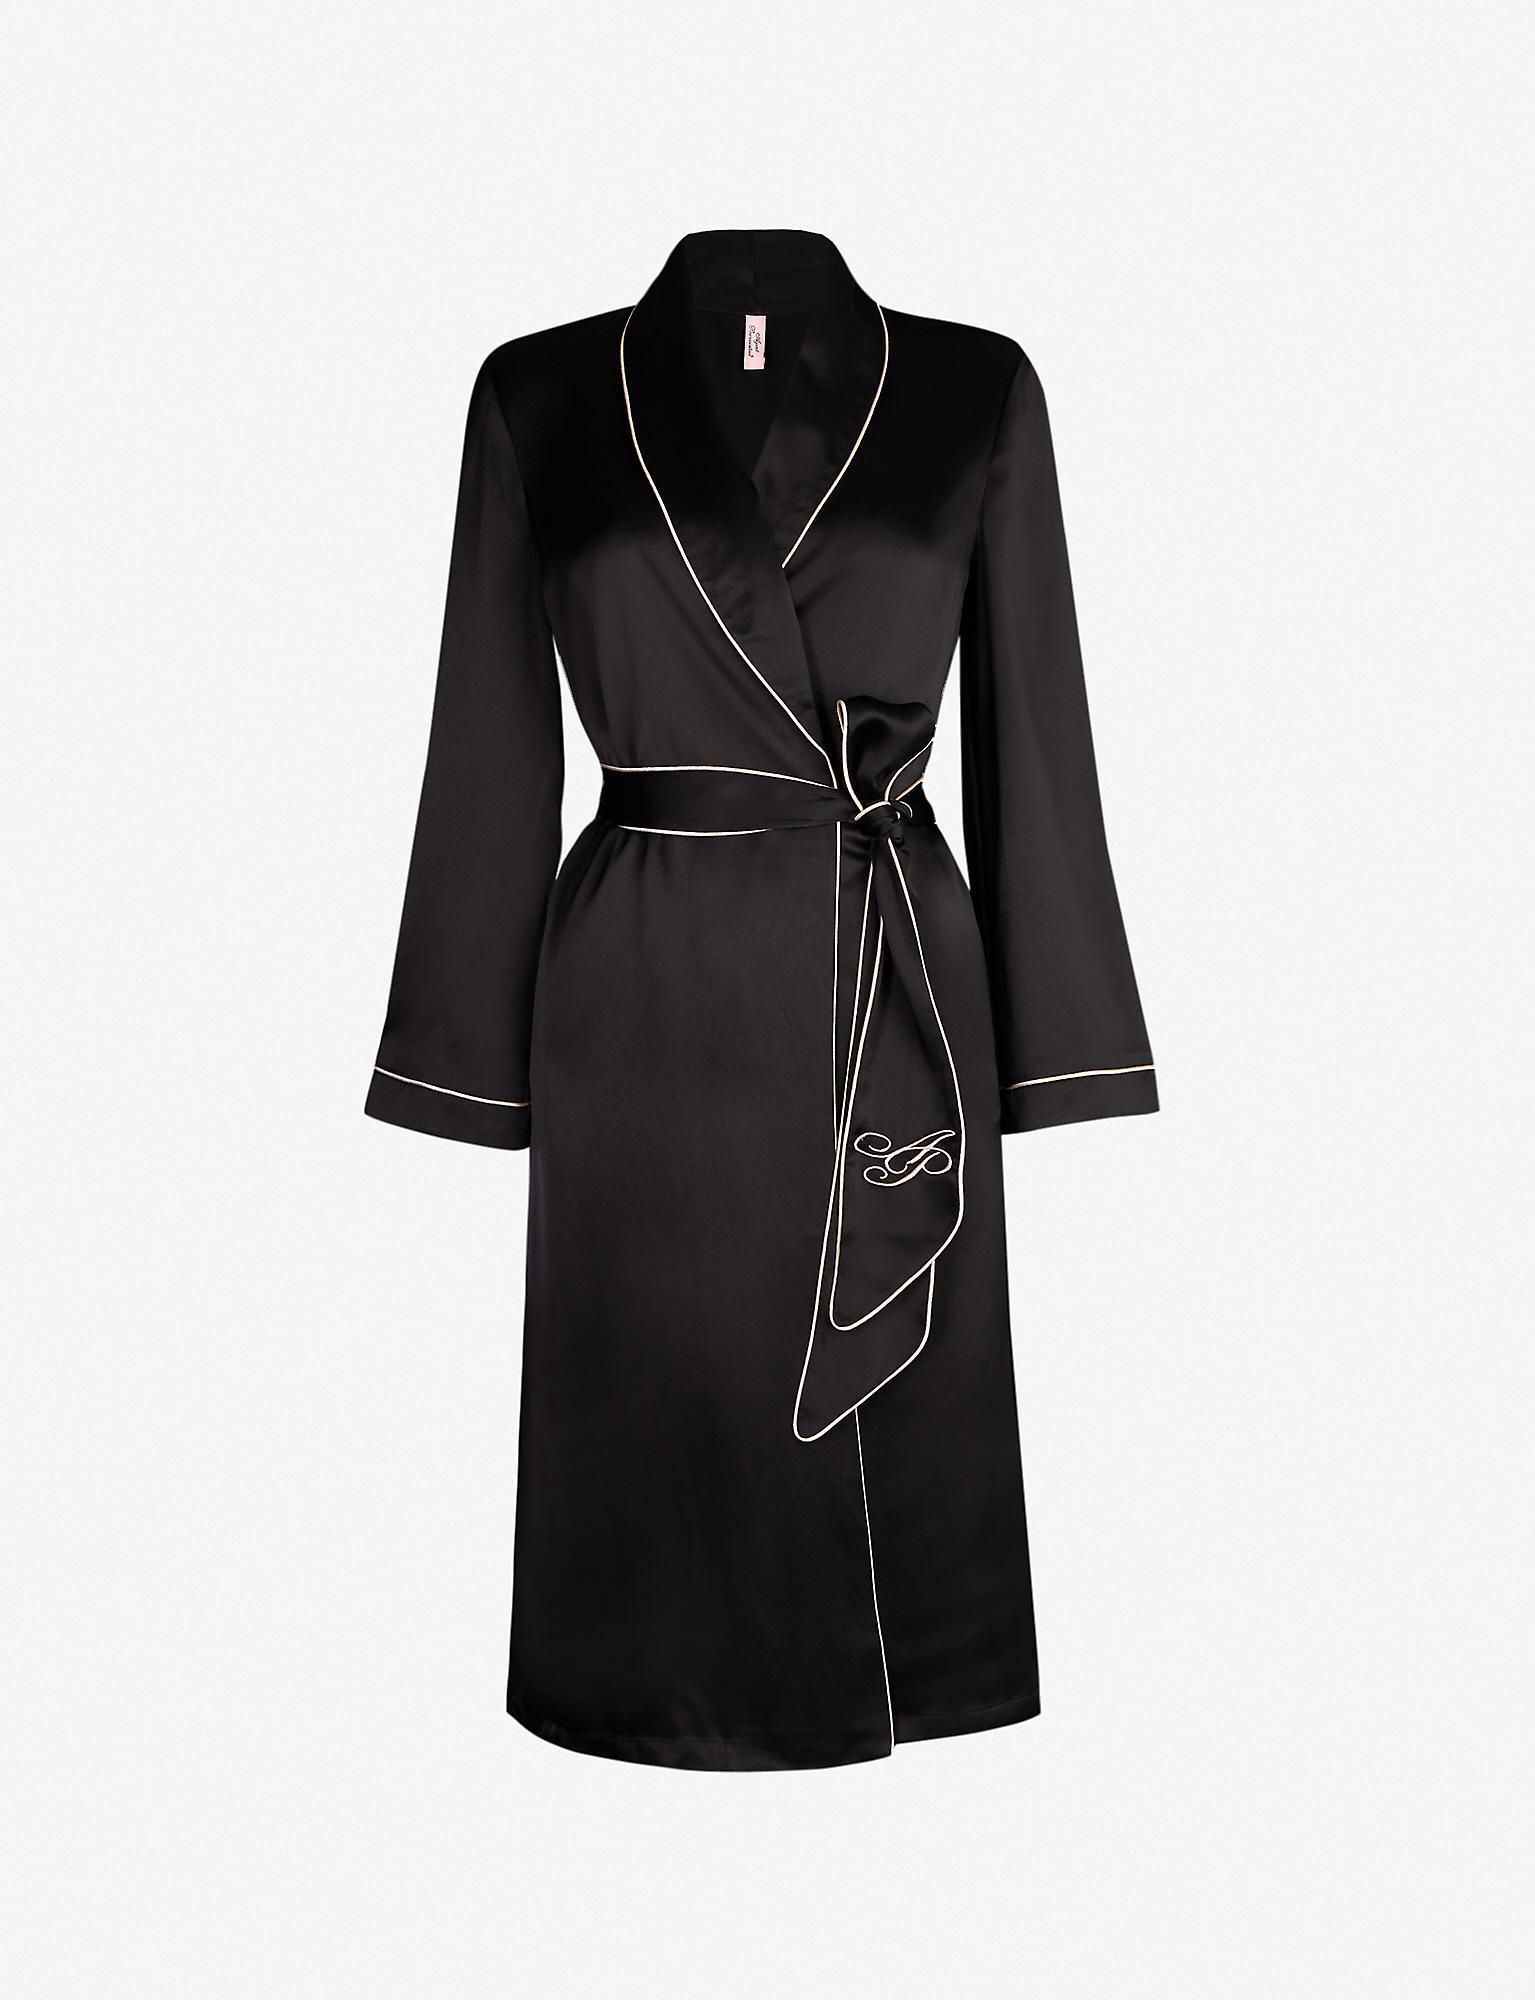 Agent Provocateur Contrast-piped Silk Robe in Black - Lyst